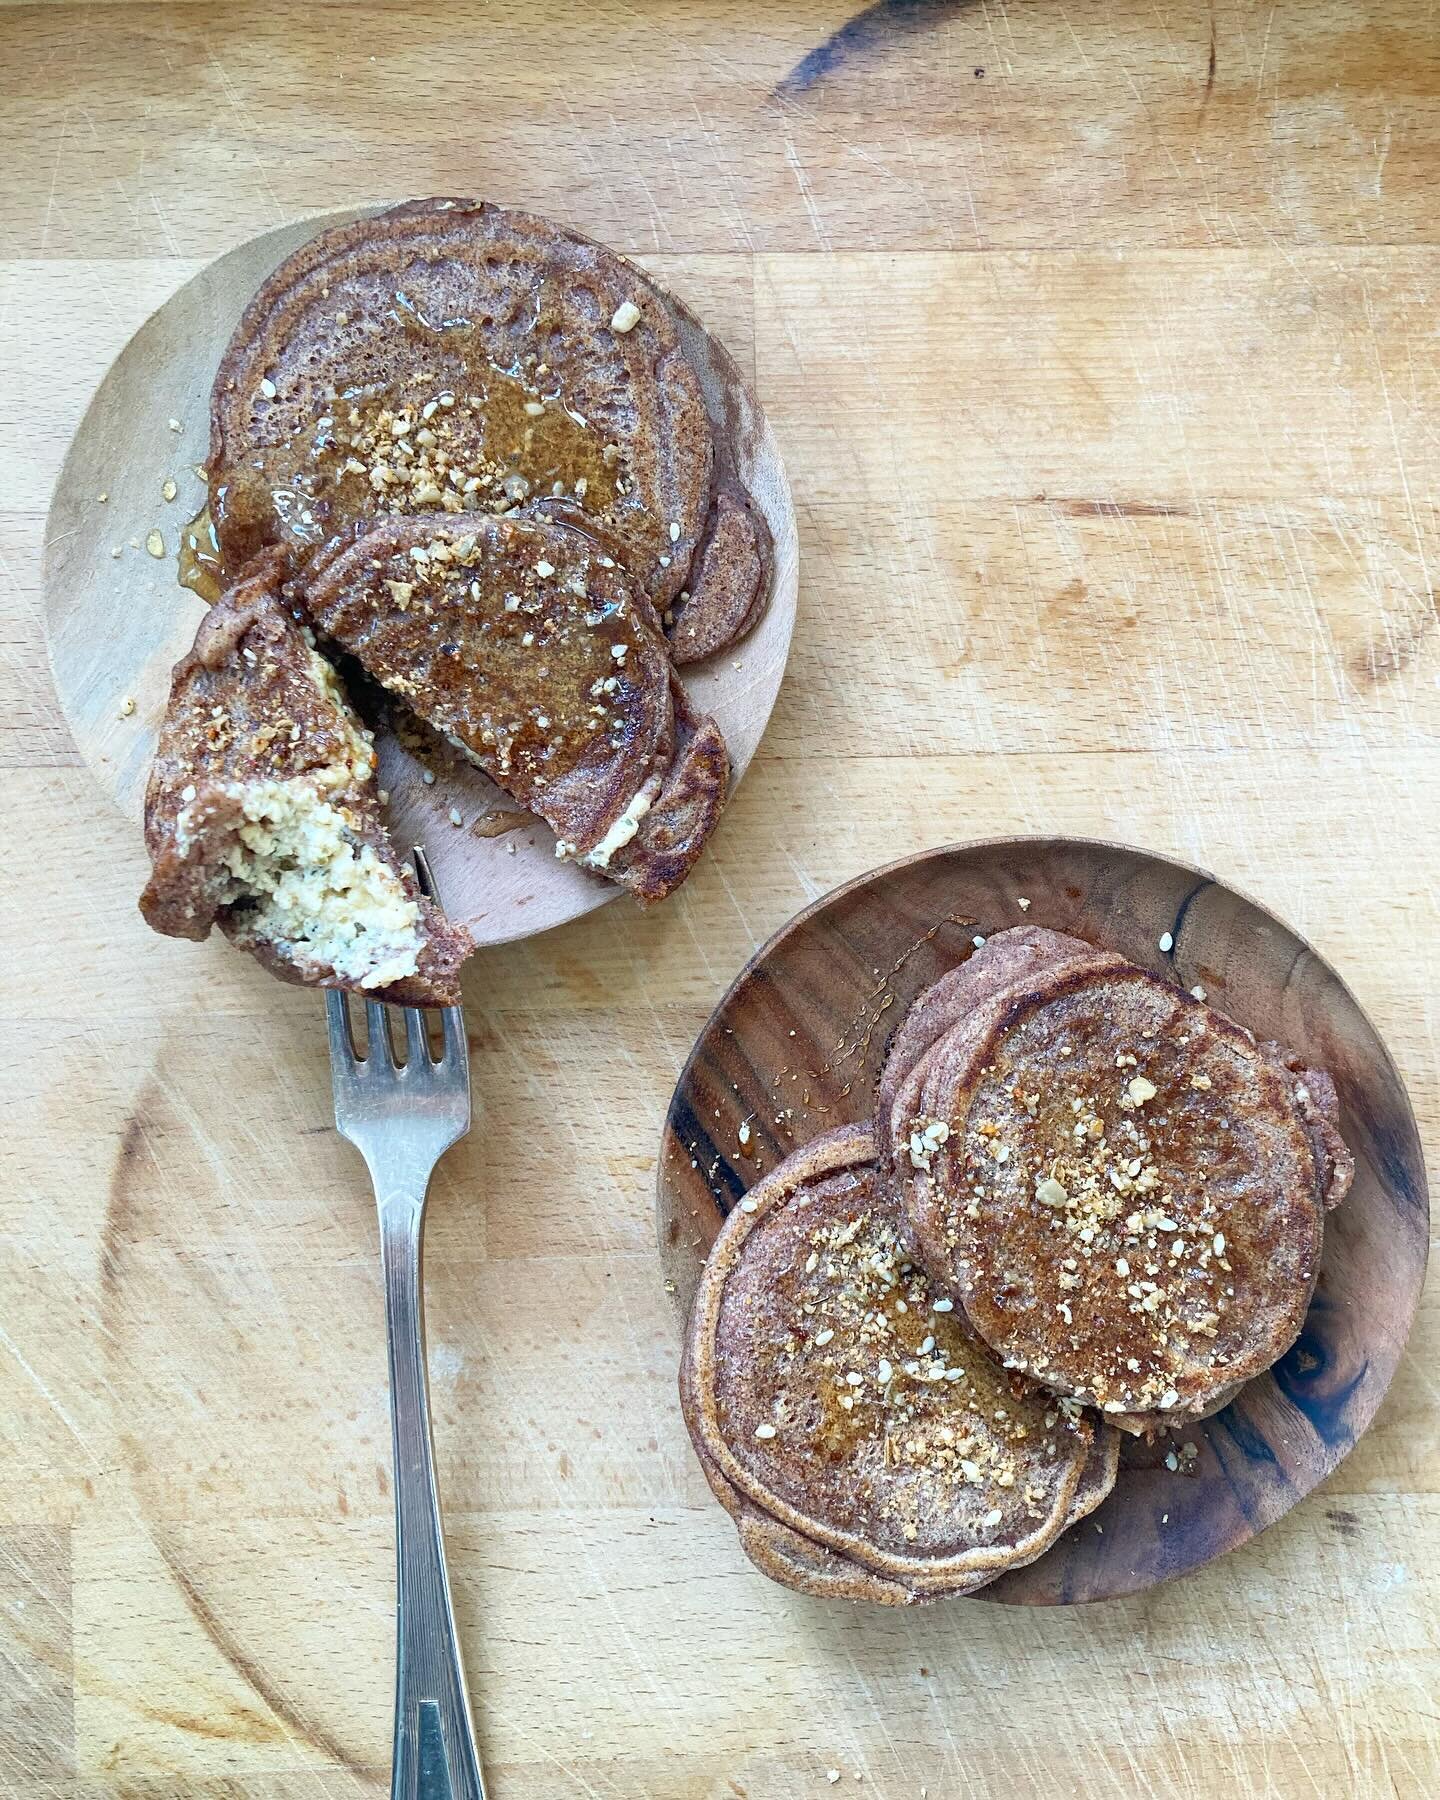 These beautifully sweet and savoury ragi and plant-ricotta pancakes with dukkah and raw honey (or maple syrup for the vegan friendly version) for pancake day and beyond. One of the playful recipes coming with our full moon writings. 

Before being re